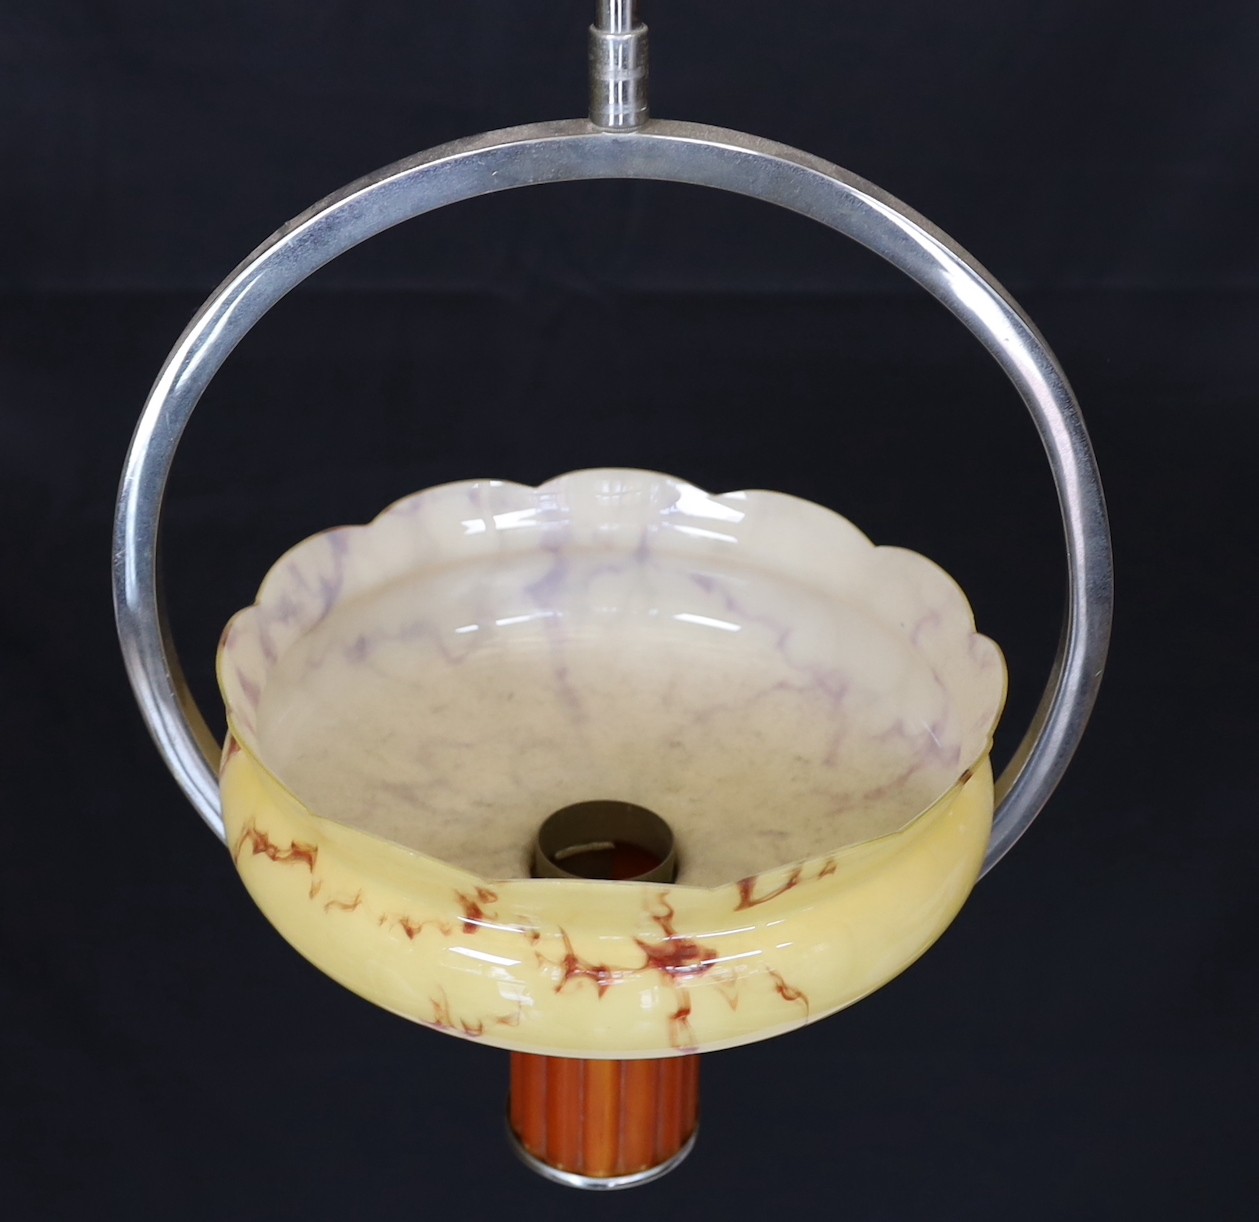 A 1930s English nickel plated, bakelite and marbled glass light fitting, height 66cm